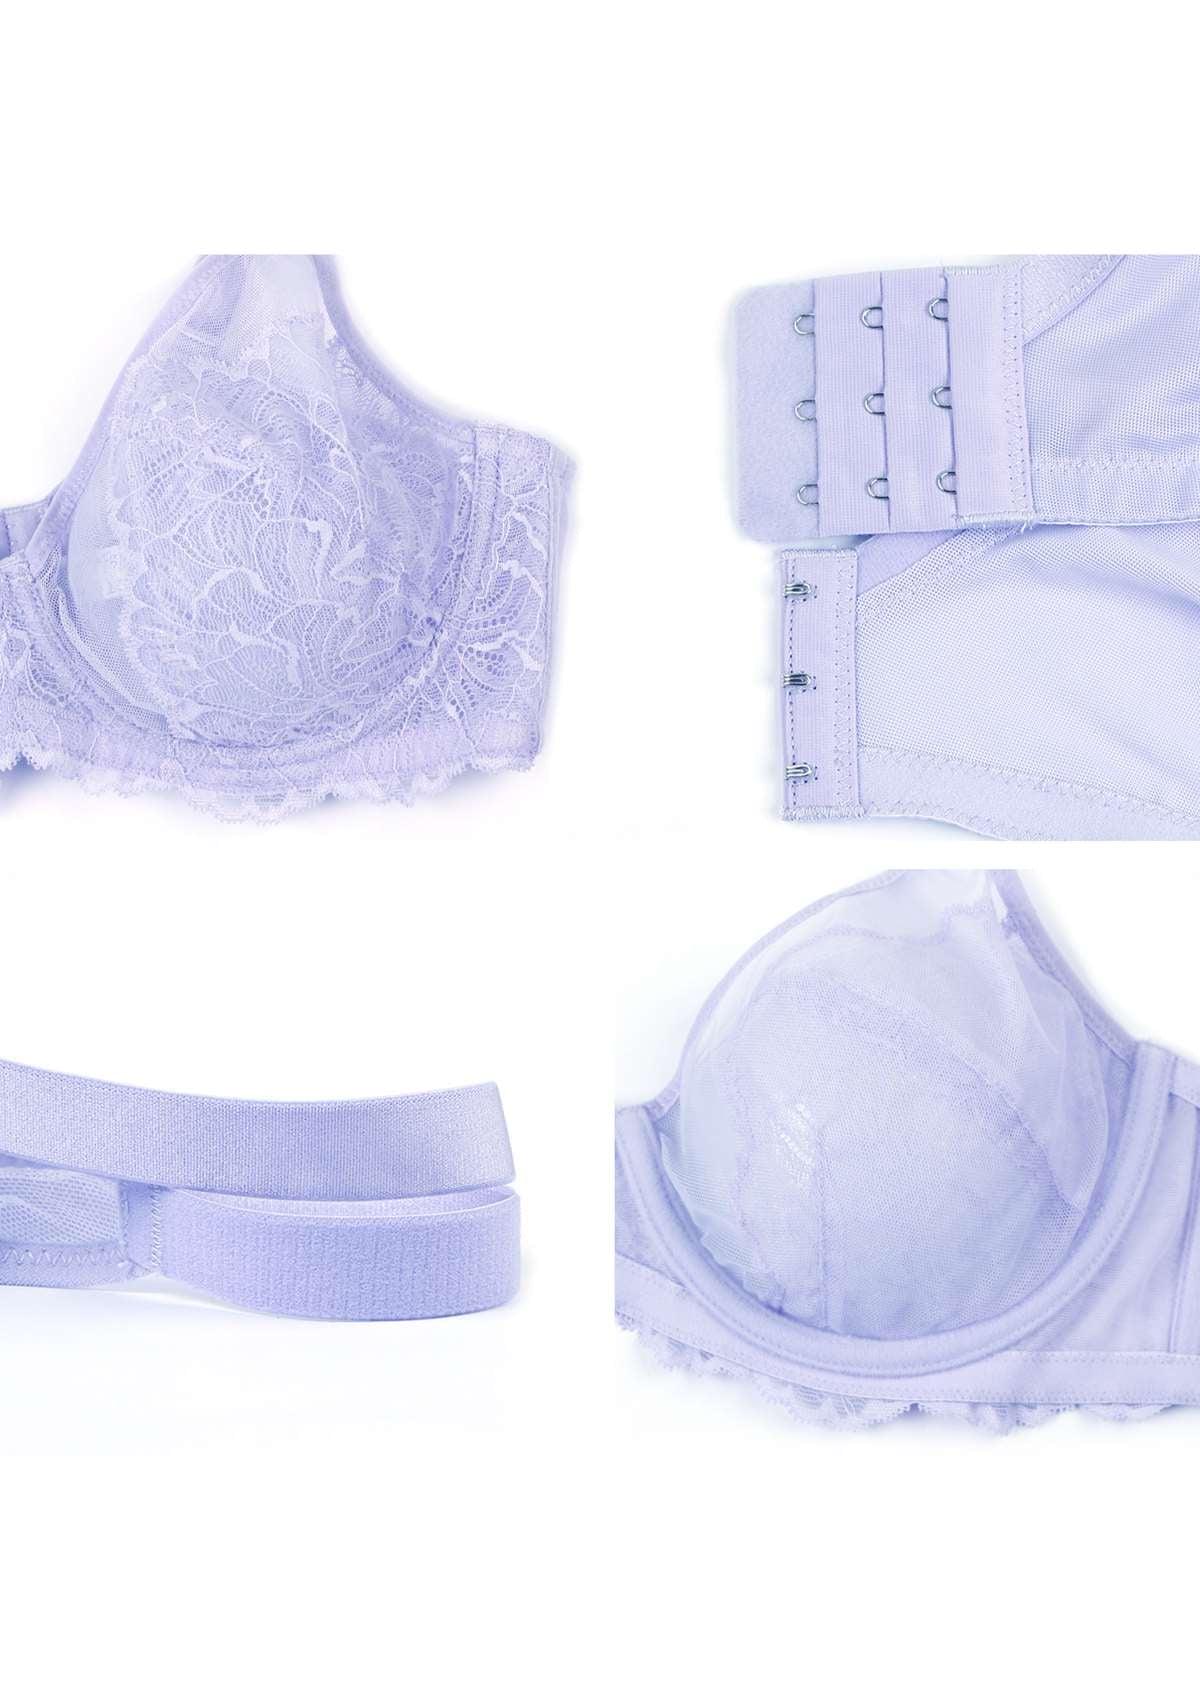 HSIA Blossom Transparent Lace Bra: Plus Size Wired Back Smoothing Bra - Light Purple / 36 / H